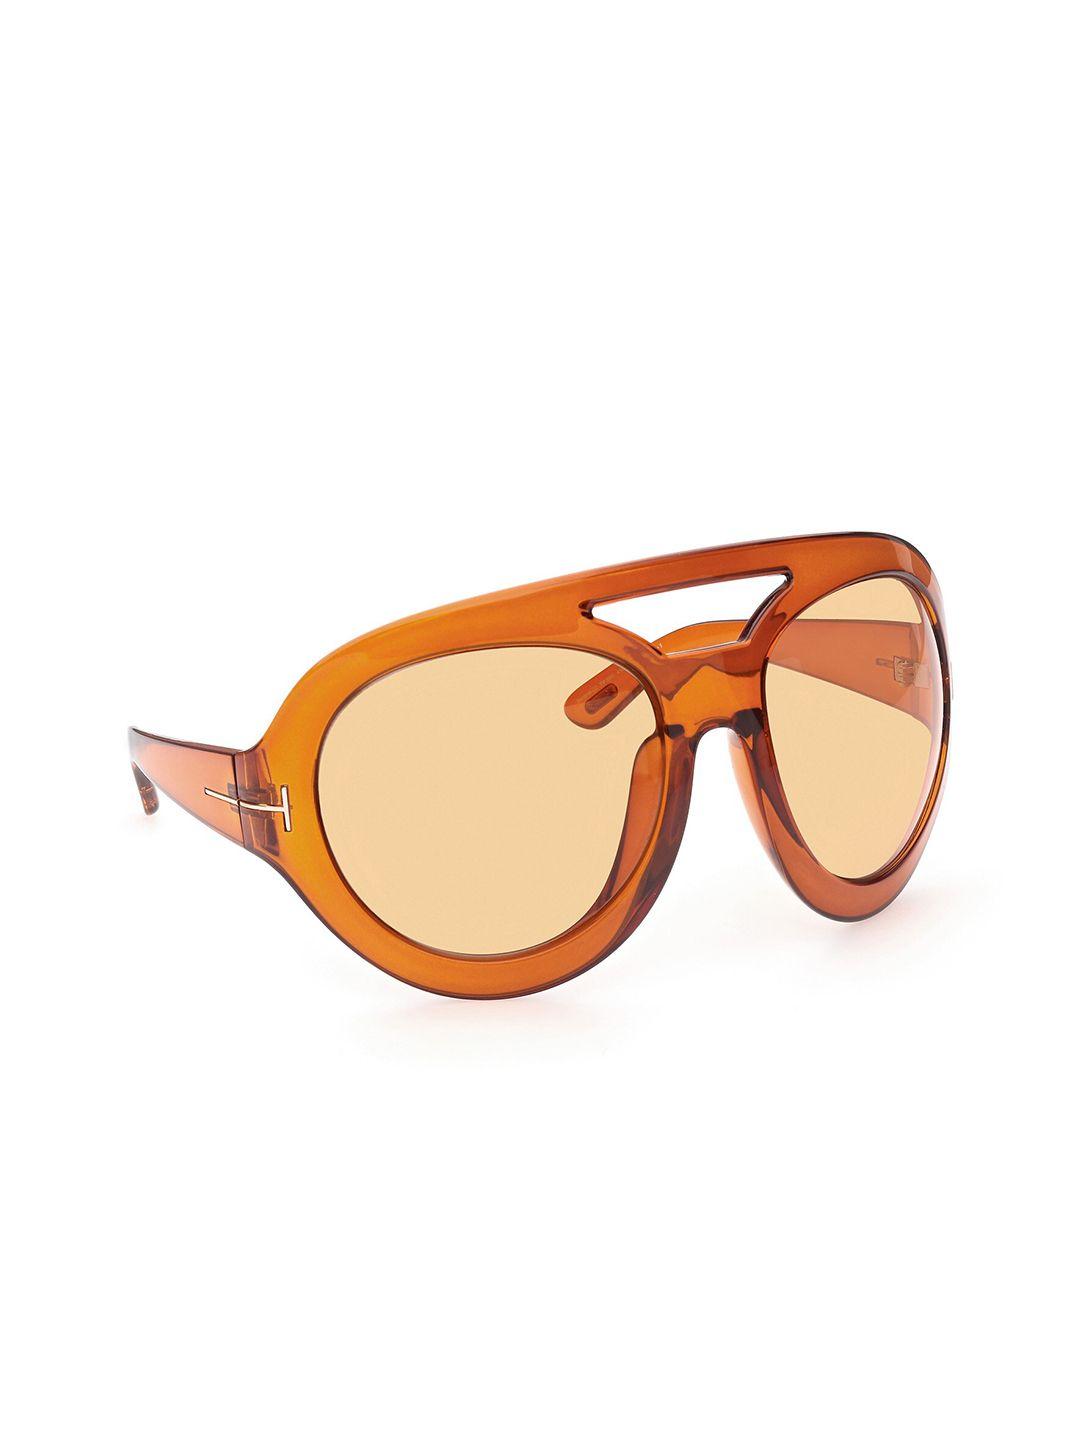 tom ford women oversized sunglasses with uv protected lens